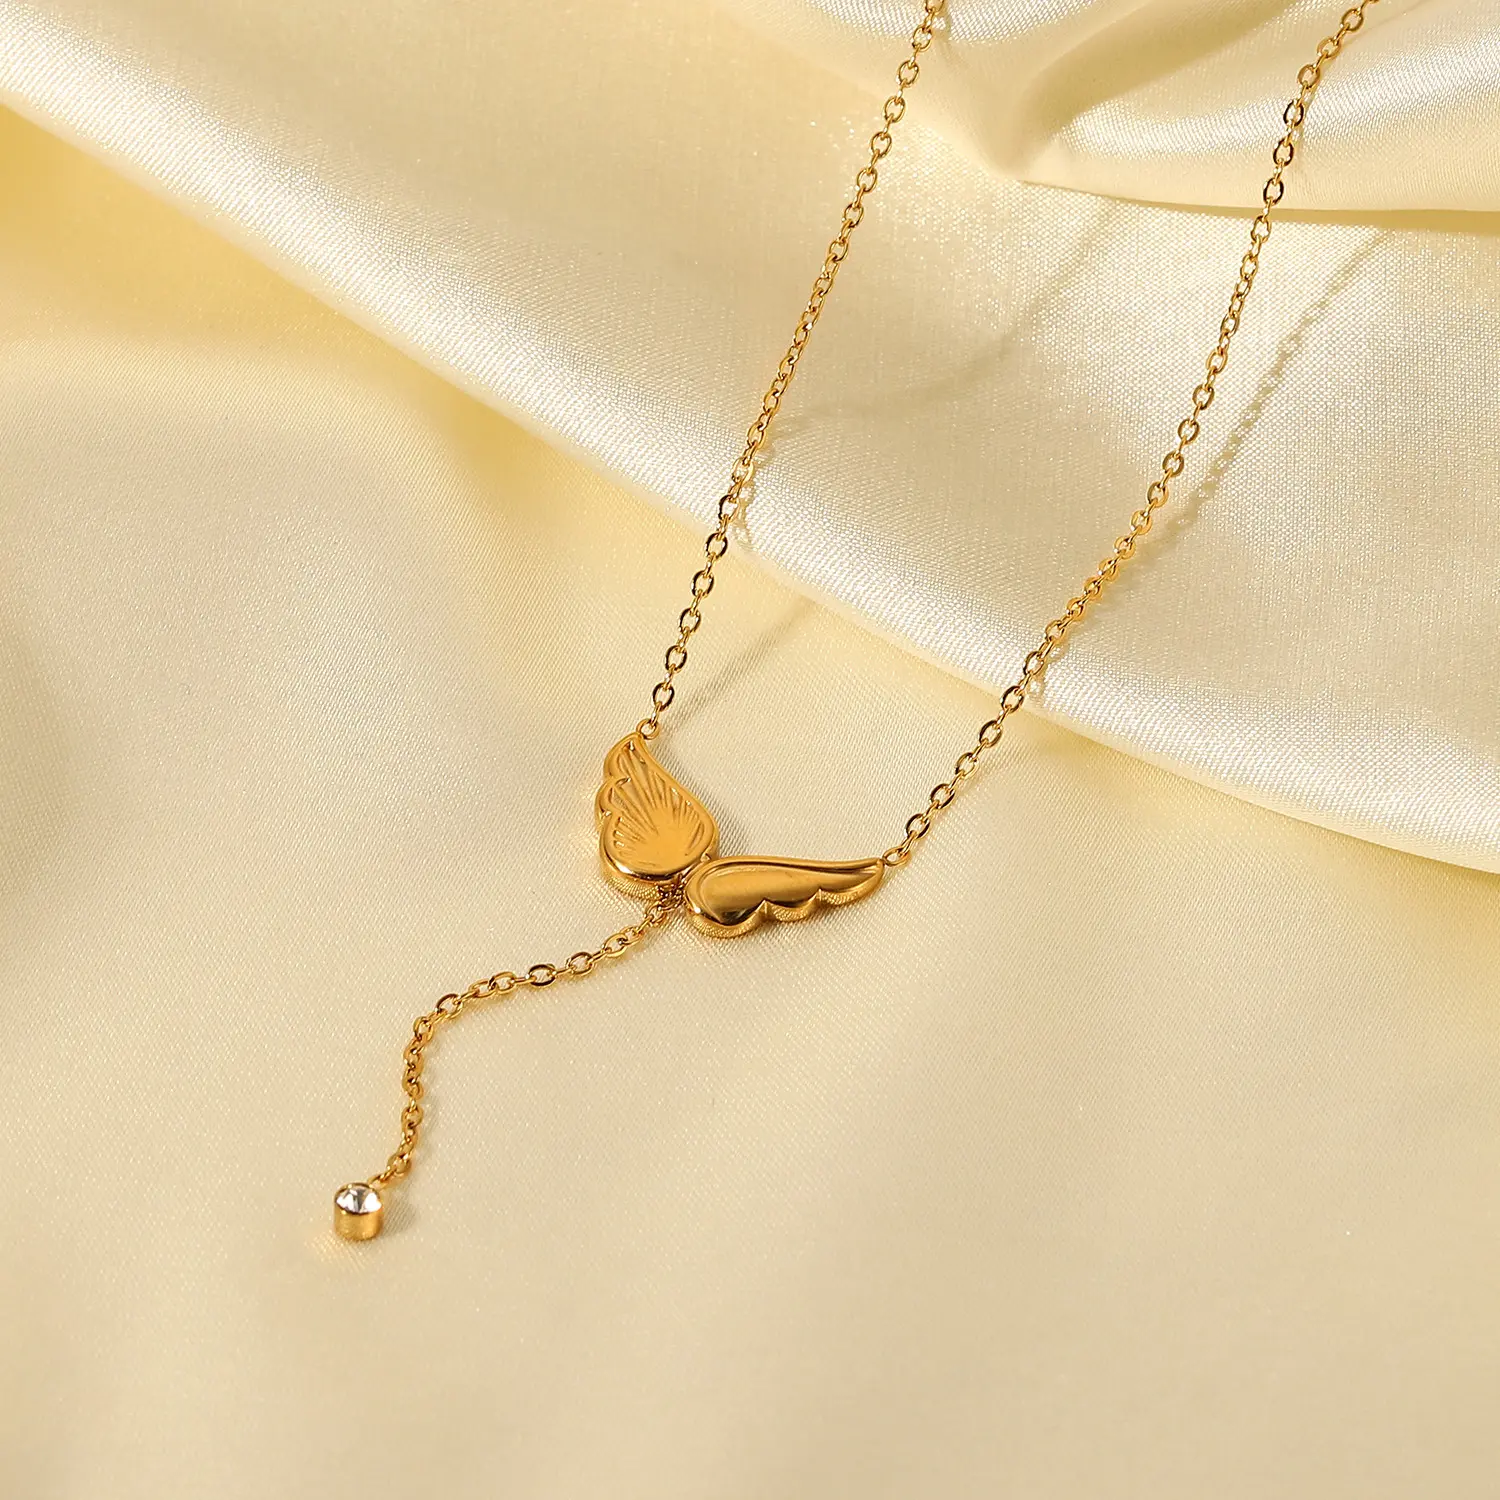 JINQI Necklace 18k Gold Plated Angel Wing Zircon Pendant Y Type Chain Stainless Steel Necklaces Fashion Jewelry